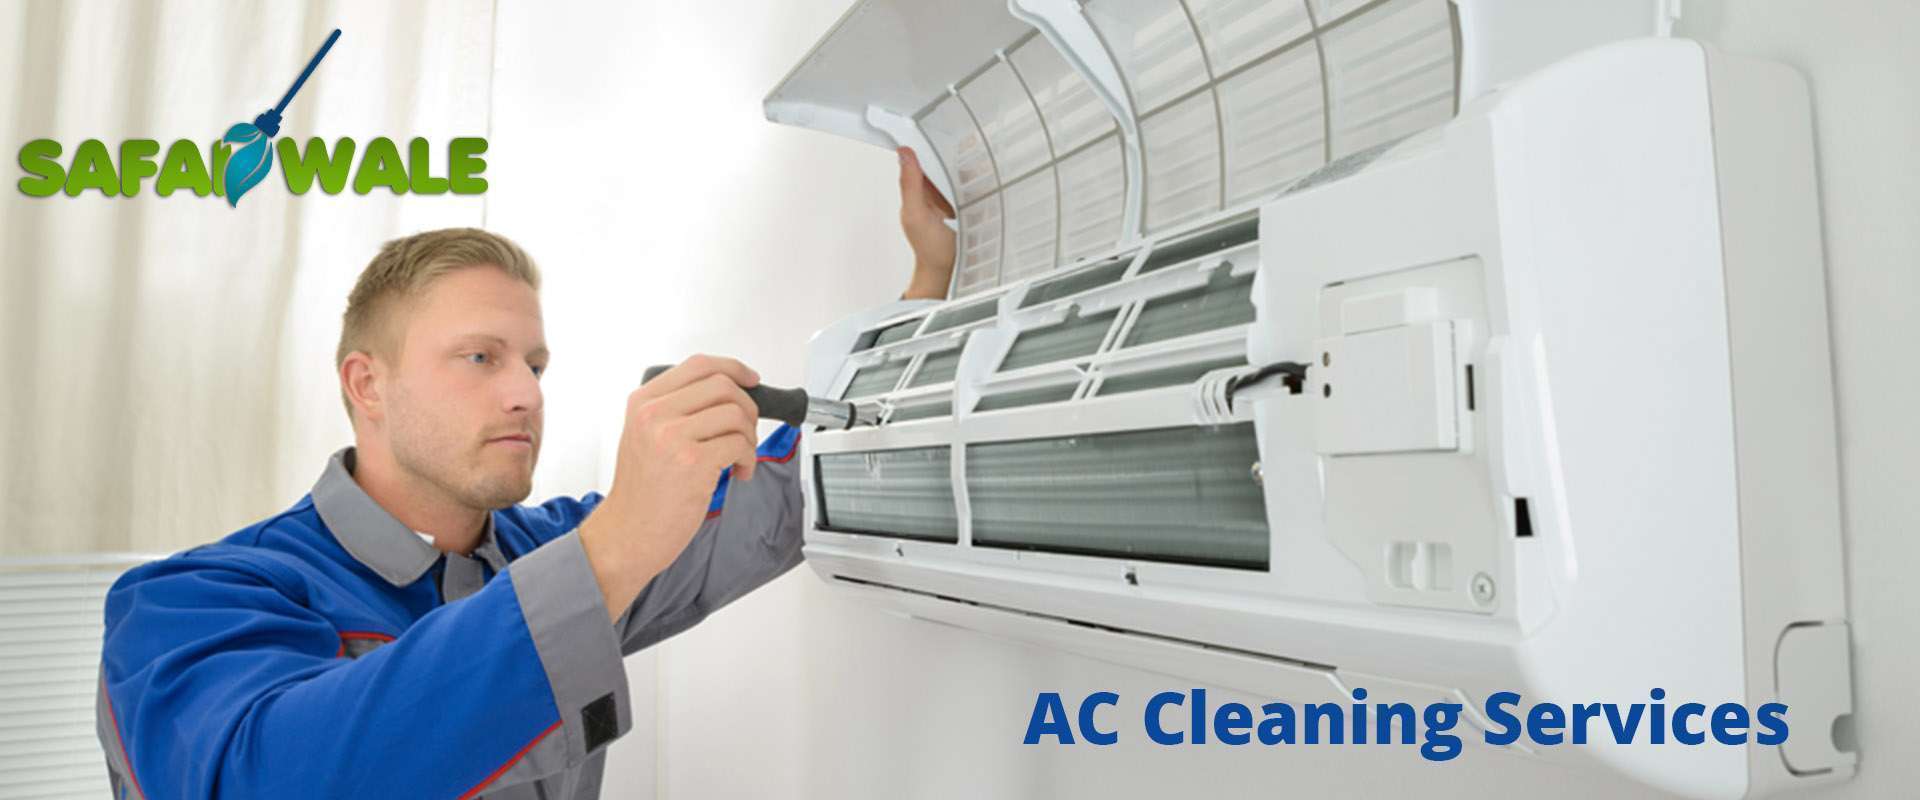 ac cleaning services in Mumbai